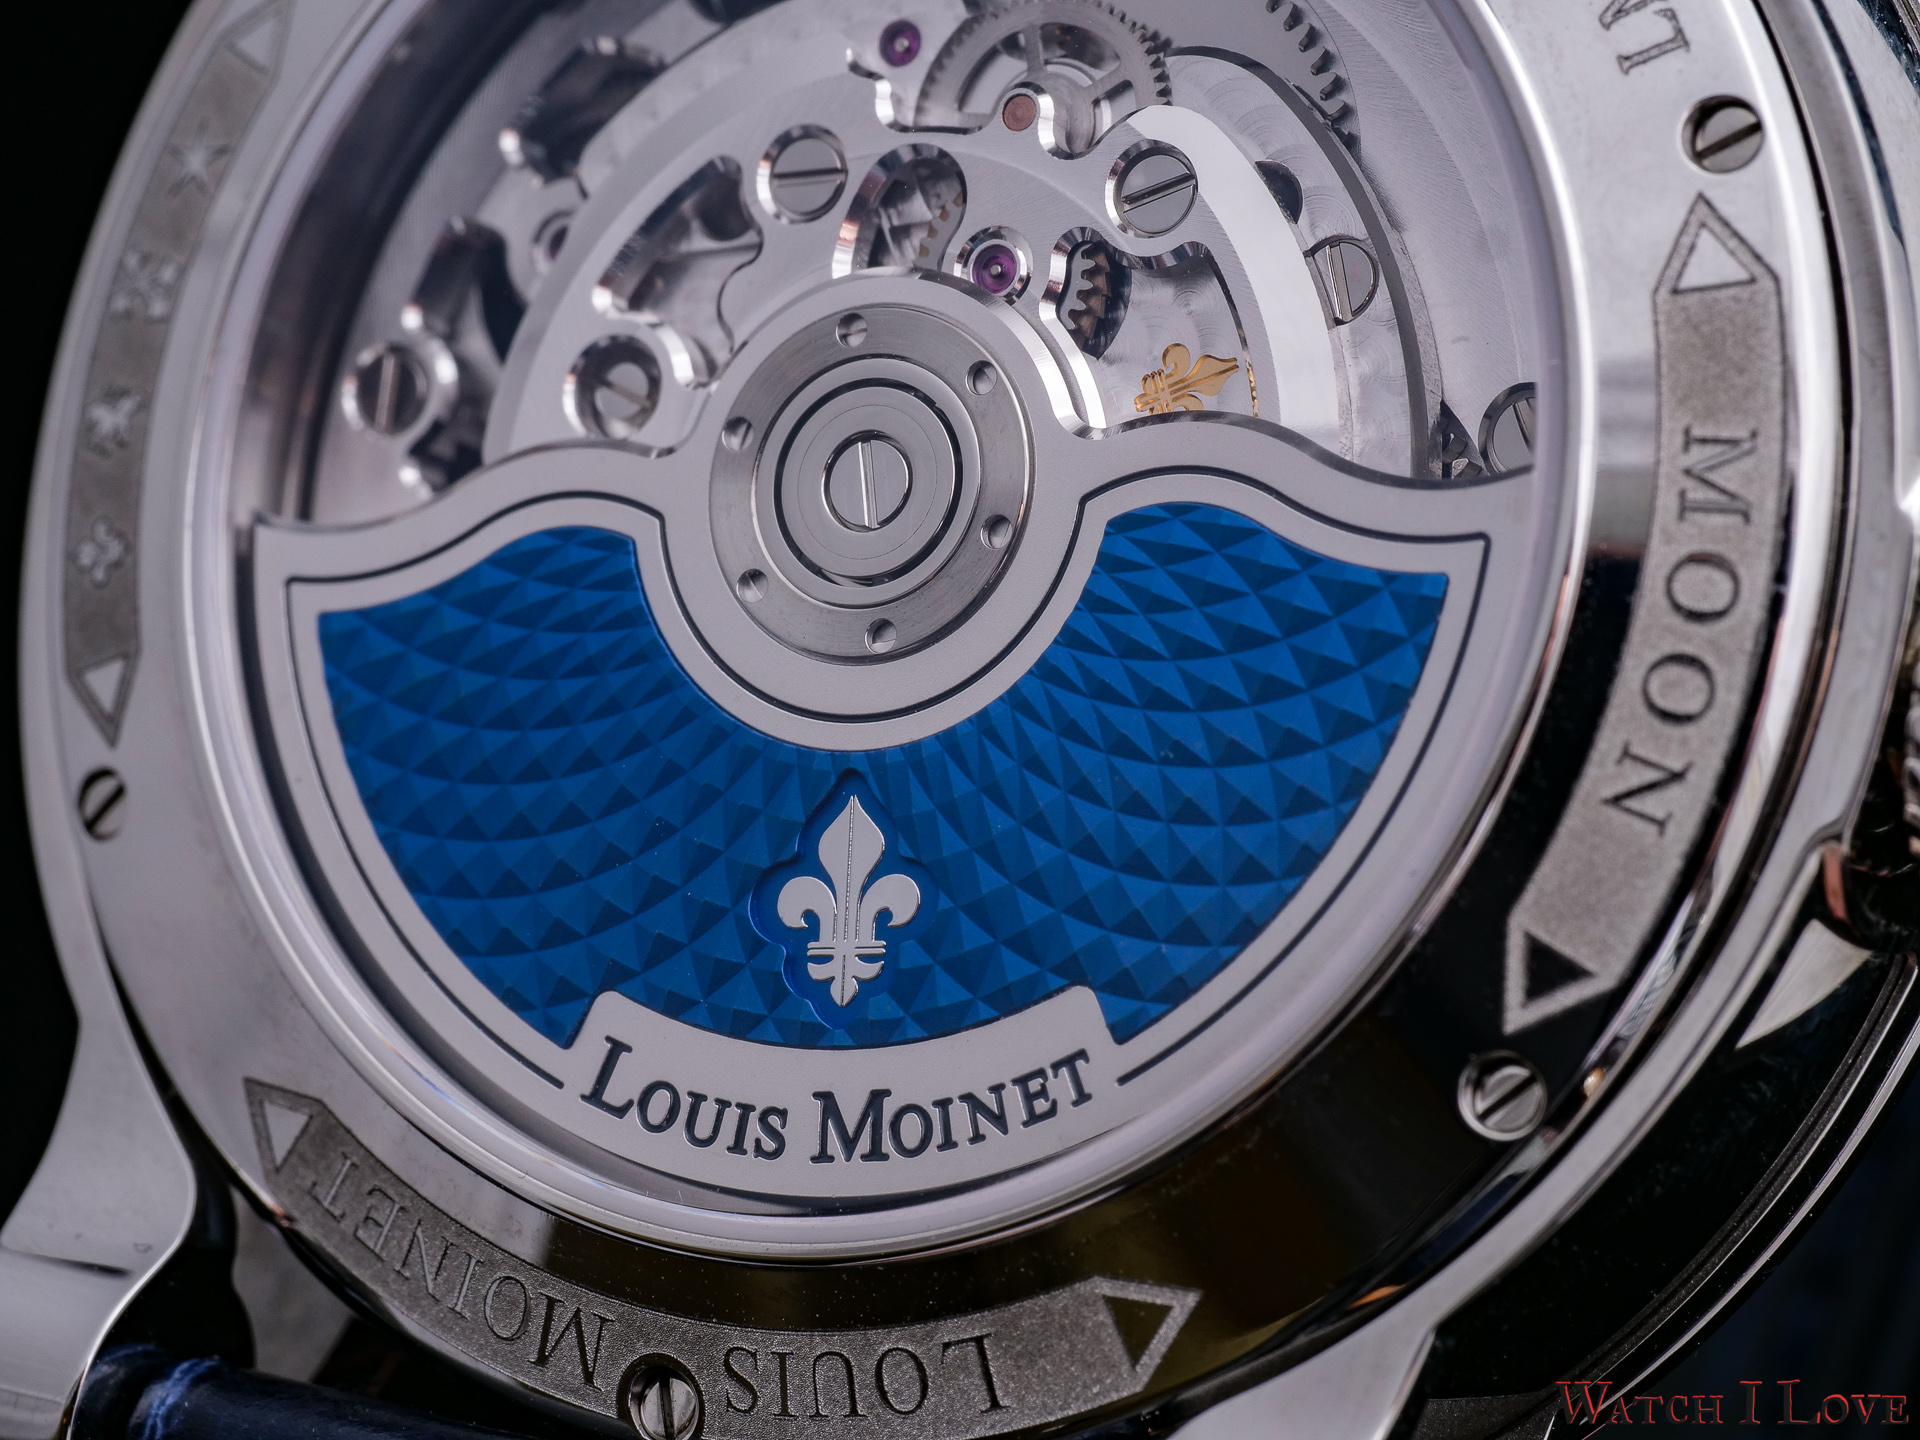 Louis Moinet Jules Vernes Tourbillon “To The Moon” – The Watch Pages